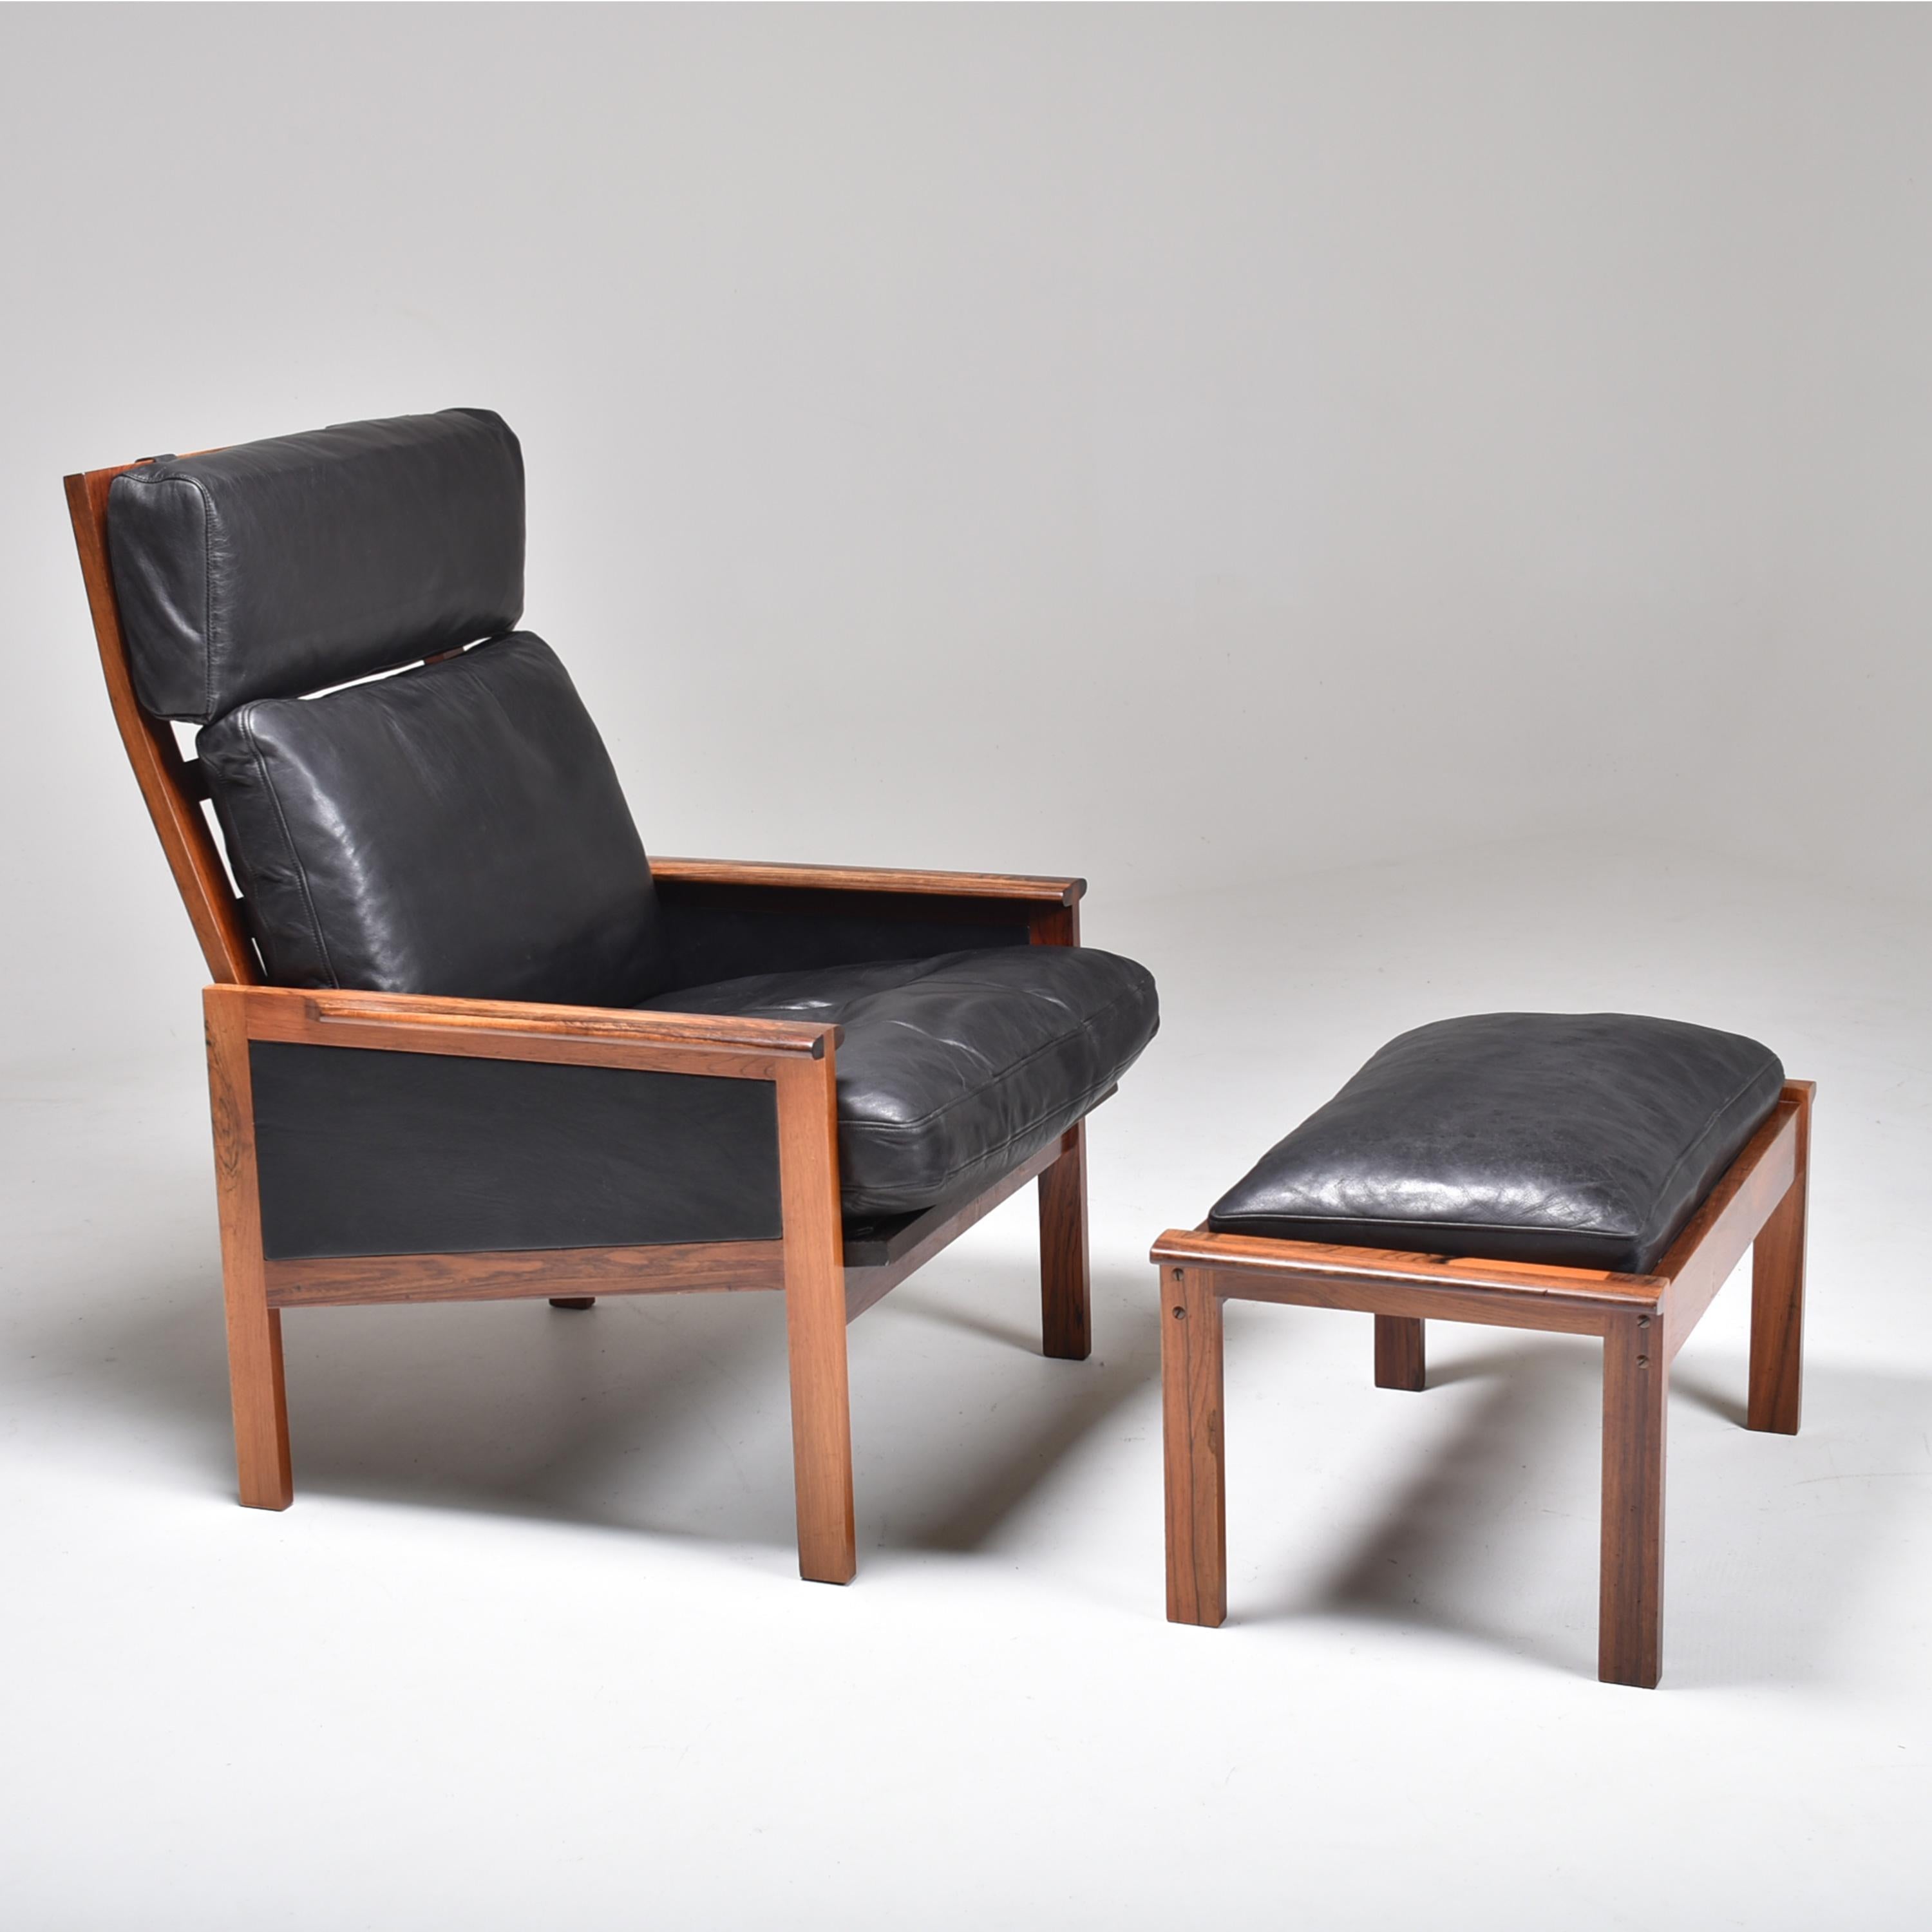 Armchair in rosewood with high back, from Denmark, 1960s. 
Designed by Illum Wikkelso for Niels Eilersen. 
Very conformable and in excellent condition. Upholstery in leather. 
A high back version of the Capella chair. Features a compact rosewood